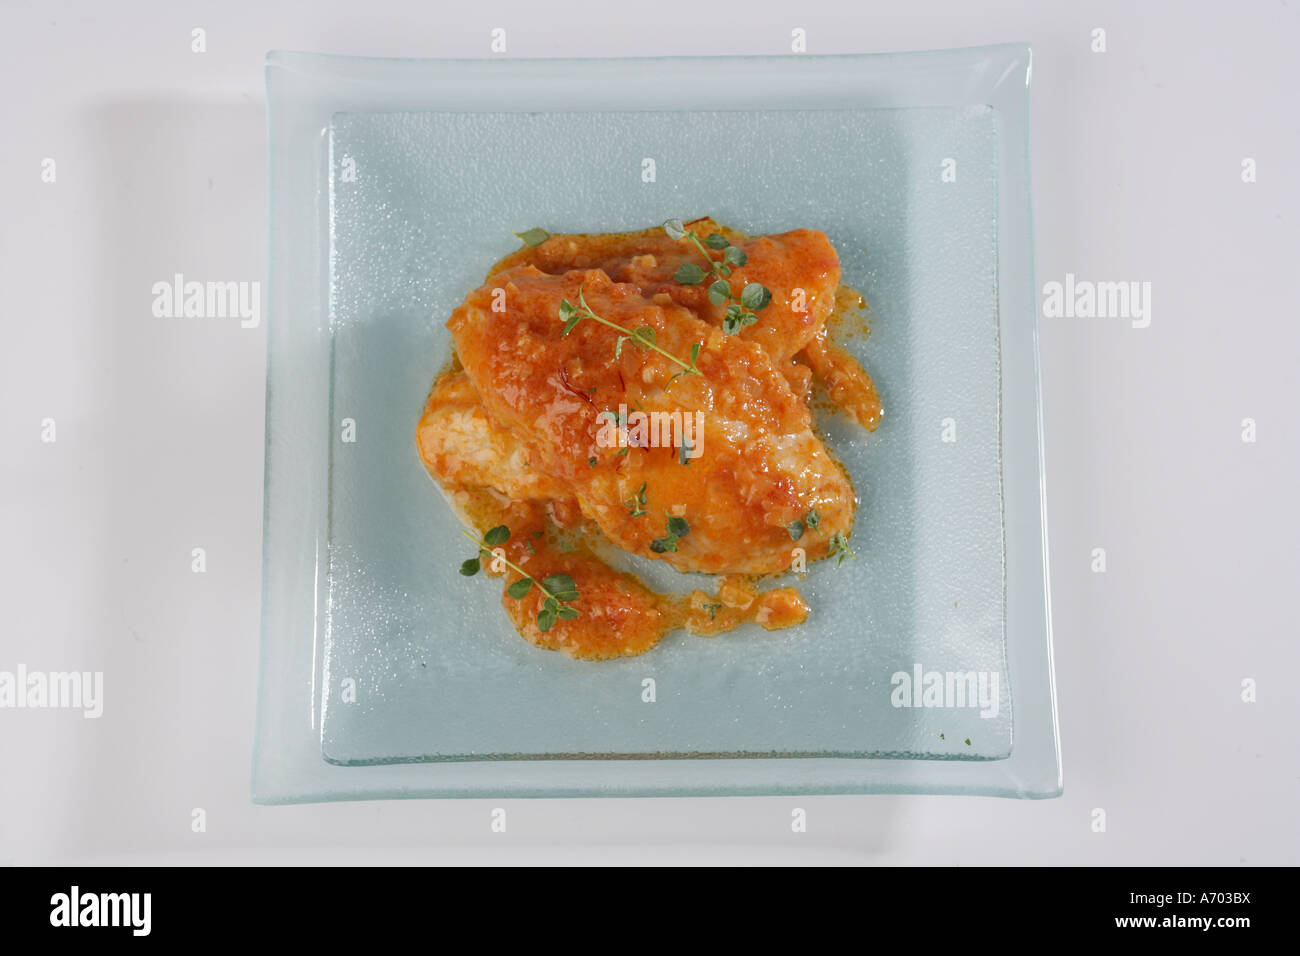 Red scorpion fish with sauce Stock Photo